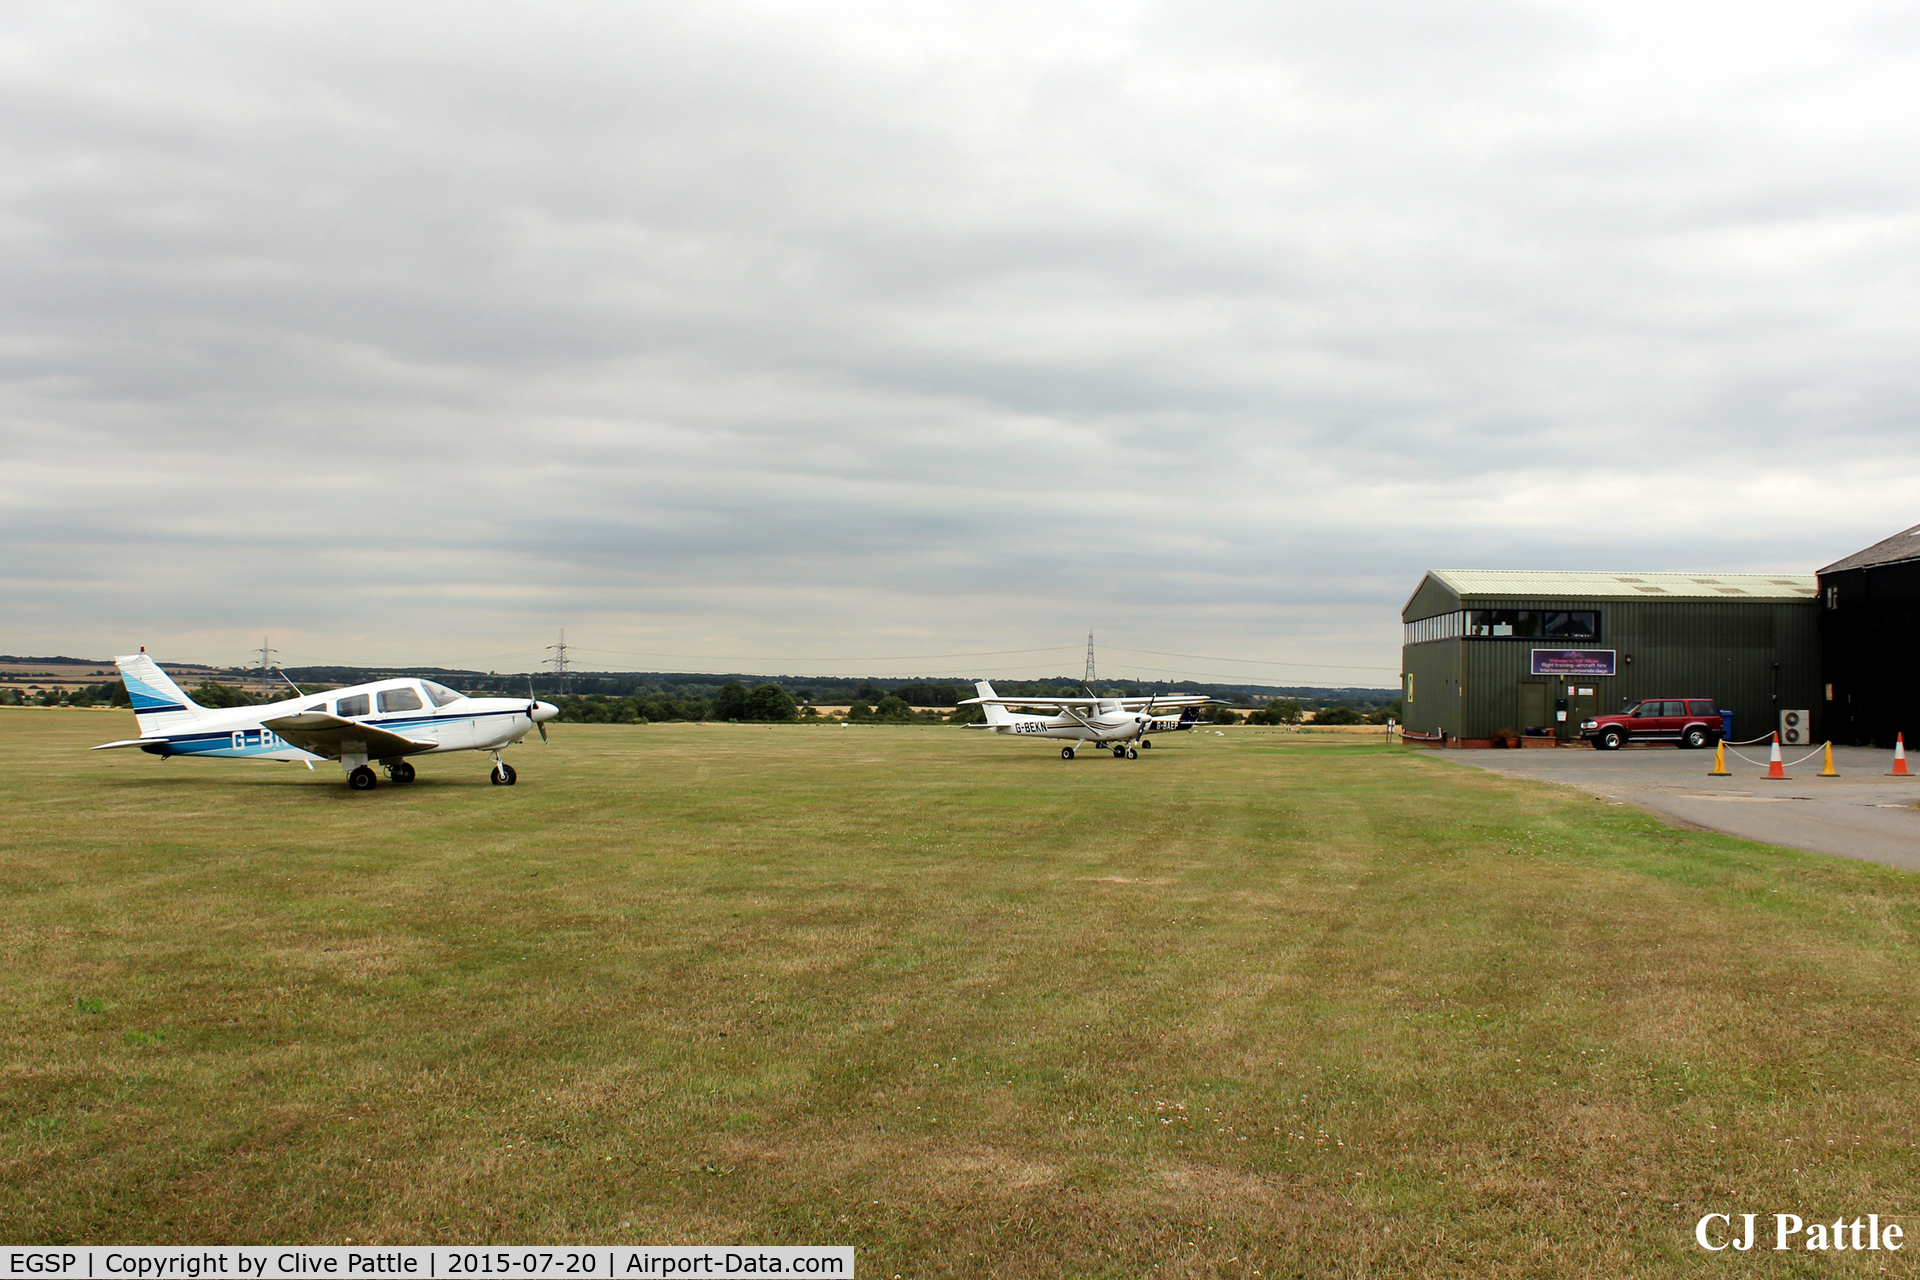 Peterborough/Sibson Airport, Peterborough, England United Kingdom (EGSP) - A view across the airfield at Sibson EGSP